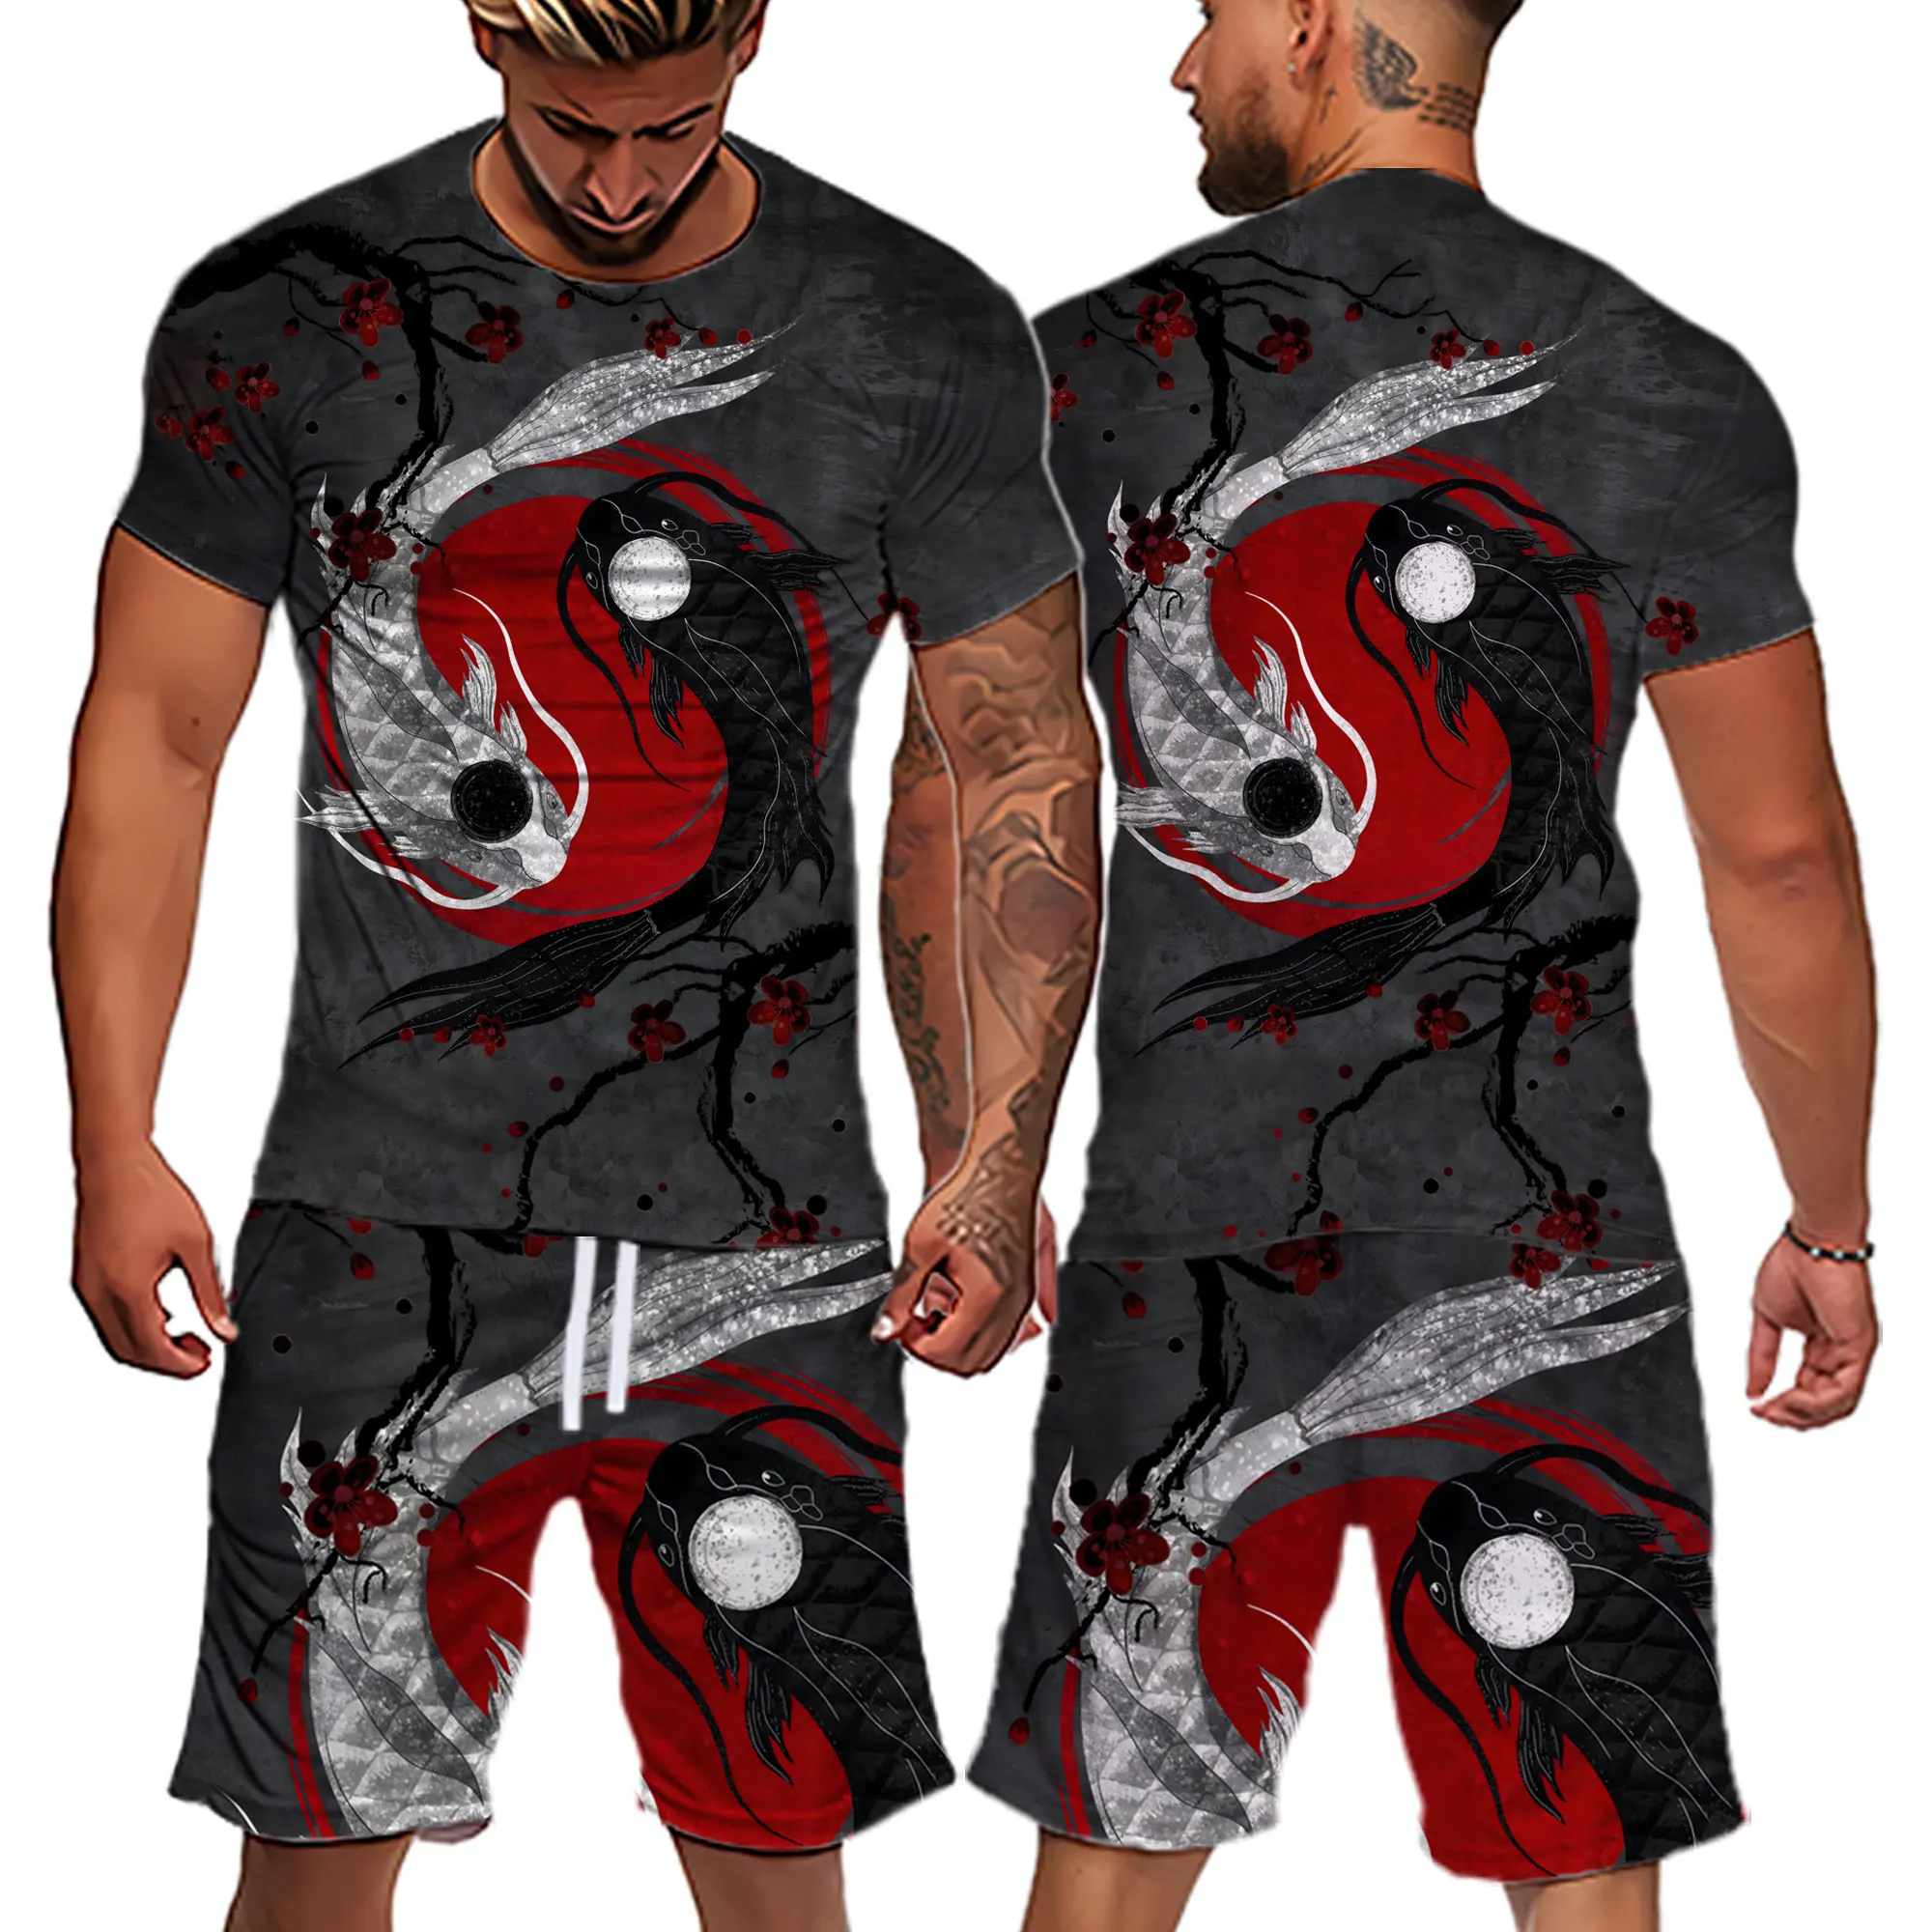 

3D Printed Yin Yang Fish Short Sleeves Tee Sets Oversized T-Shirt+Shorts Tracksuit Horror Skull Style Tshirt Suit Summer Clothes